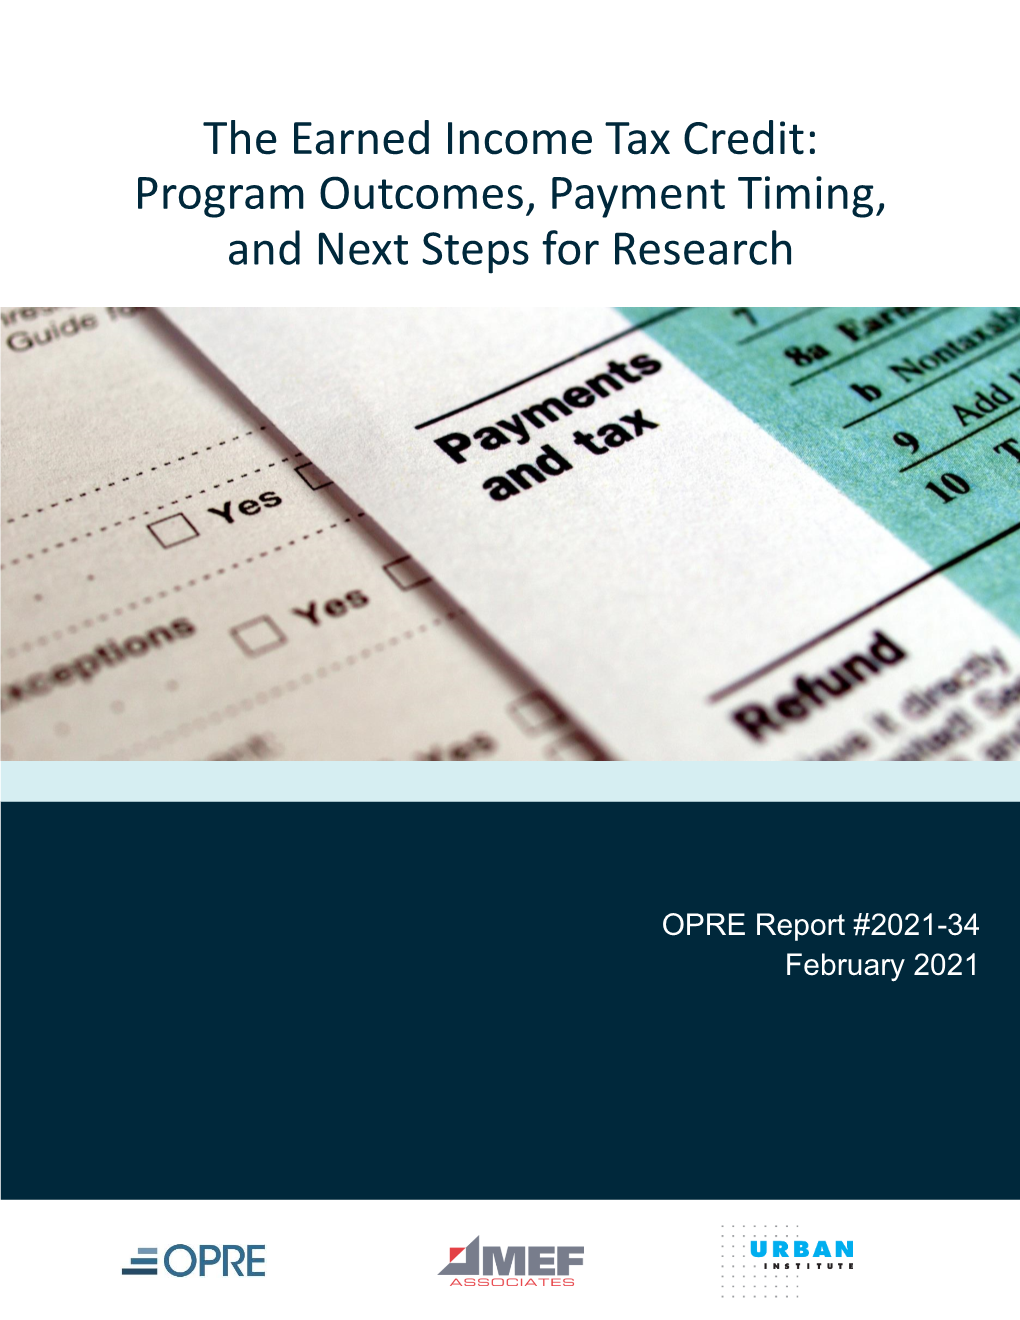 The Earned Income Tax Credit: Timing of Payments and Program Outcomes